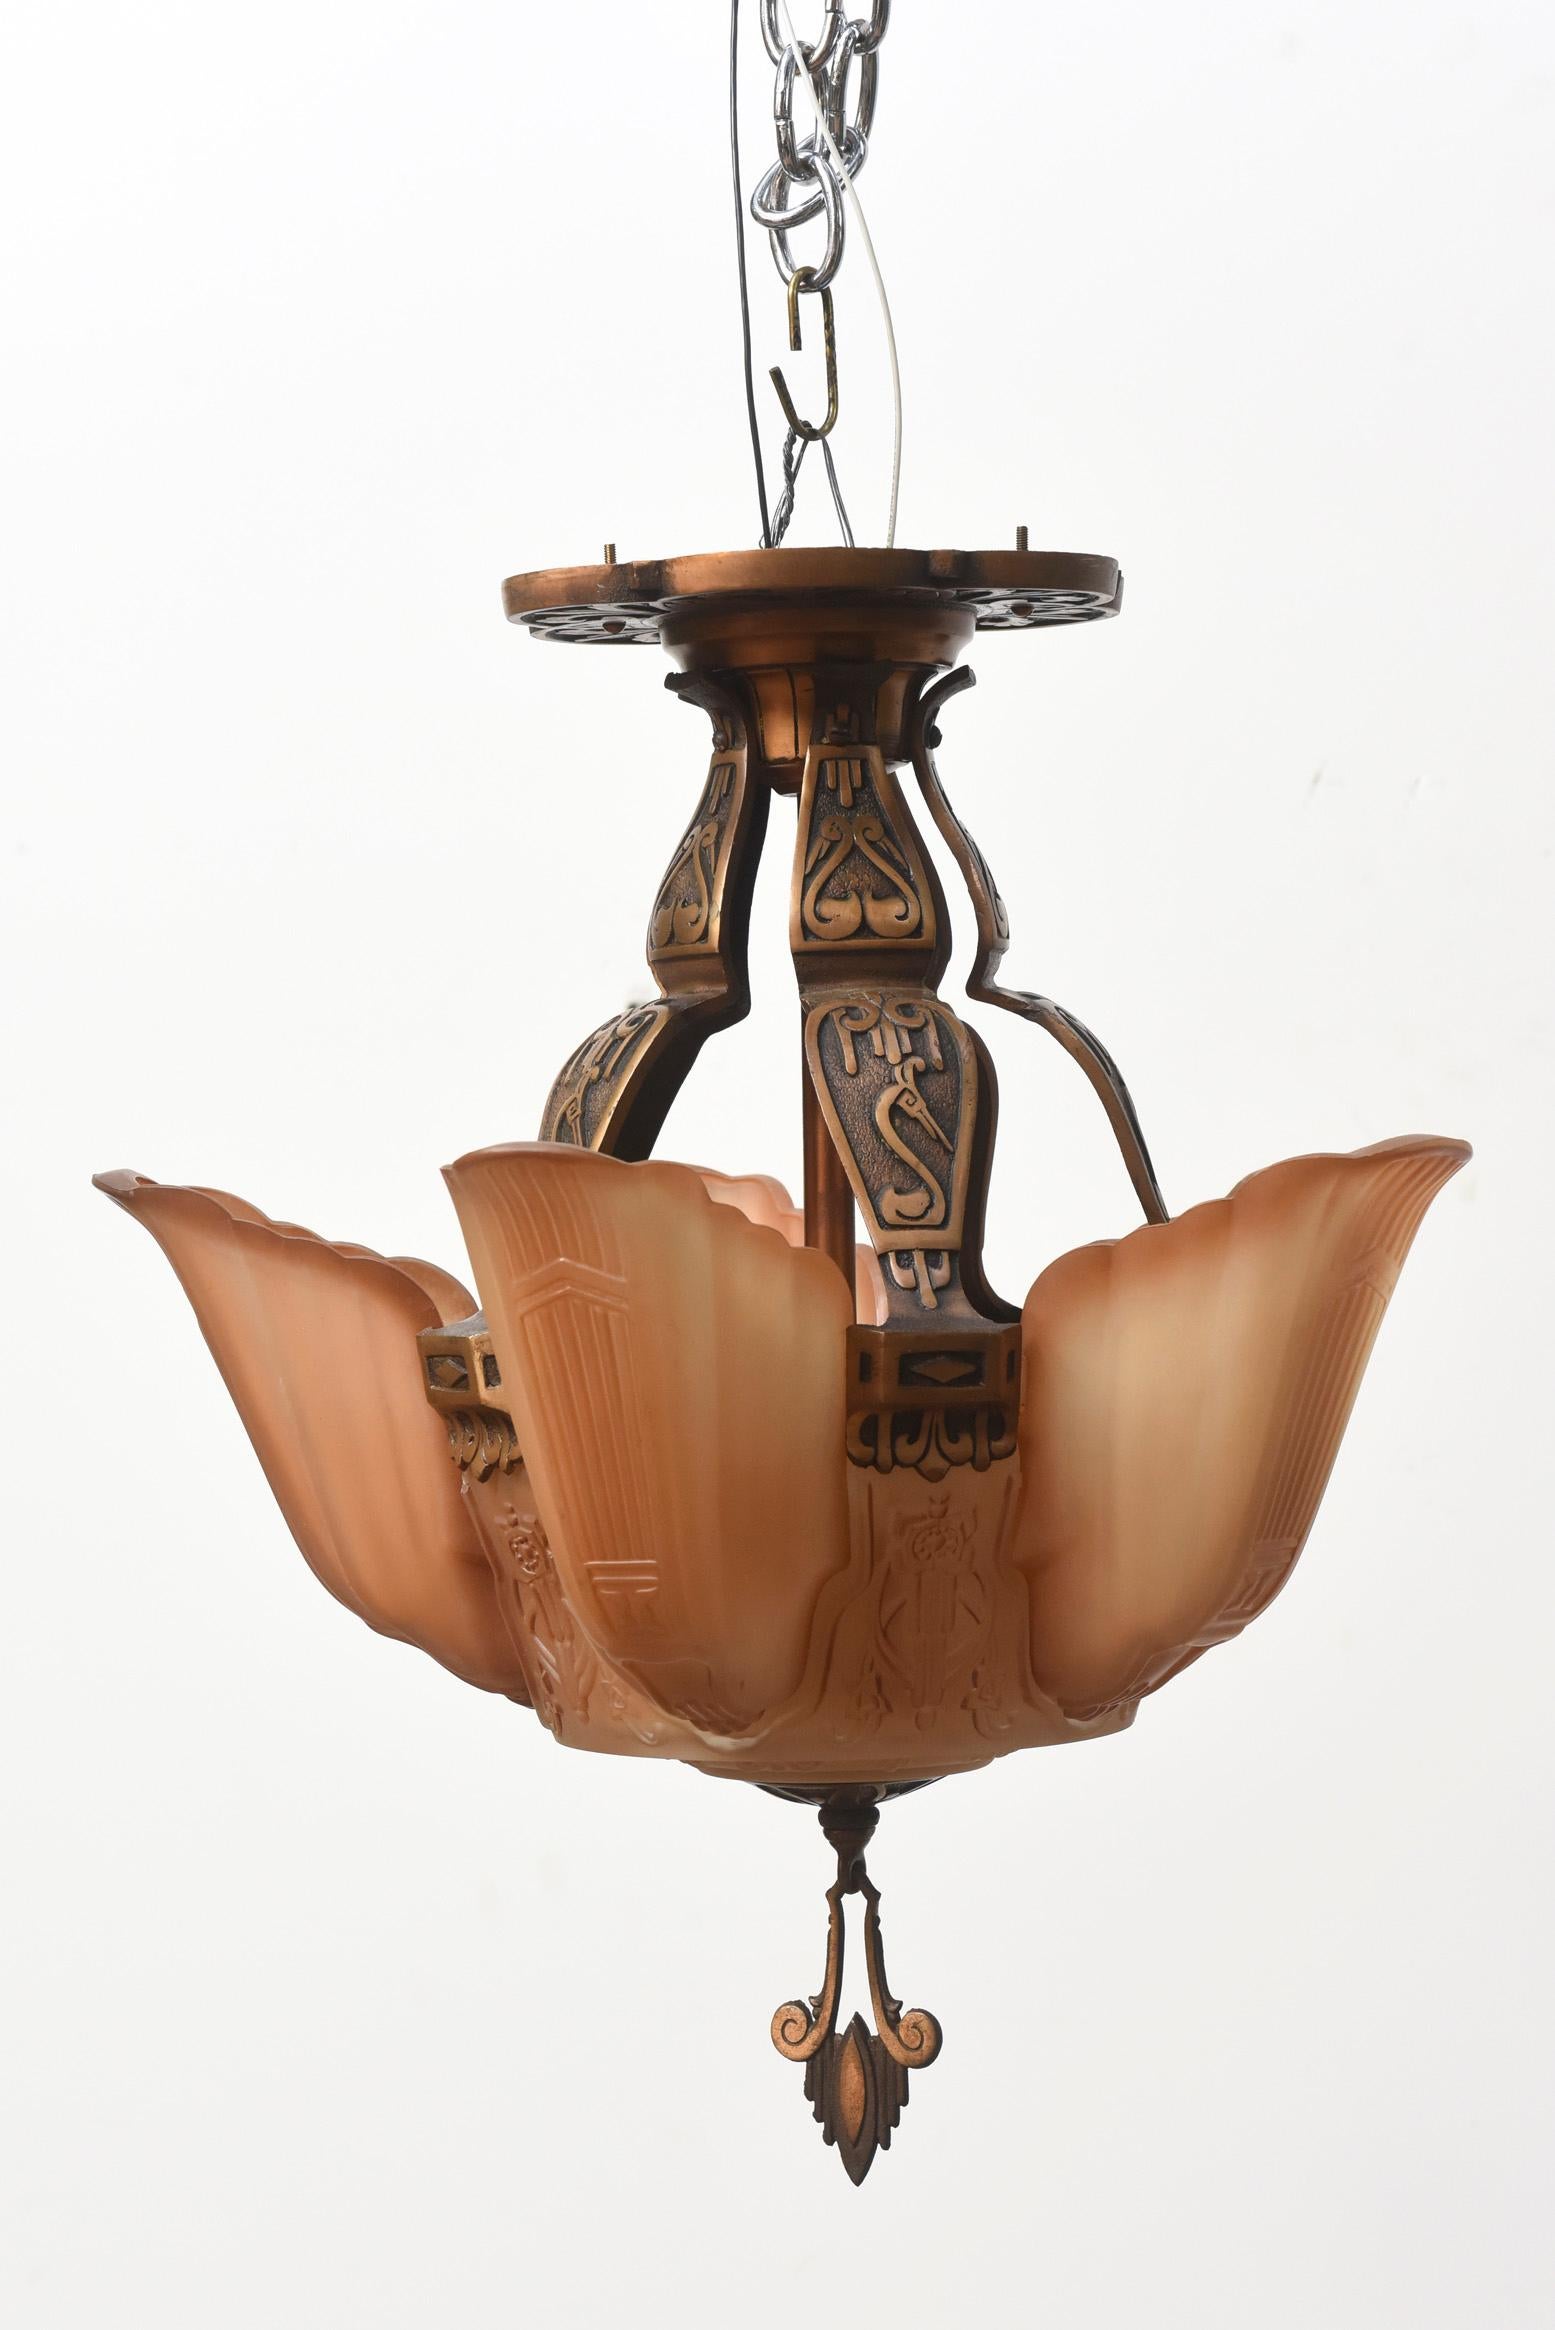 Cast American Art Deco Bronze and Glass Chandelier by Markel